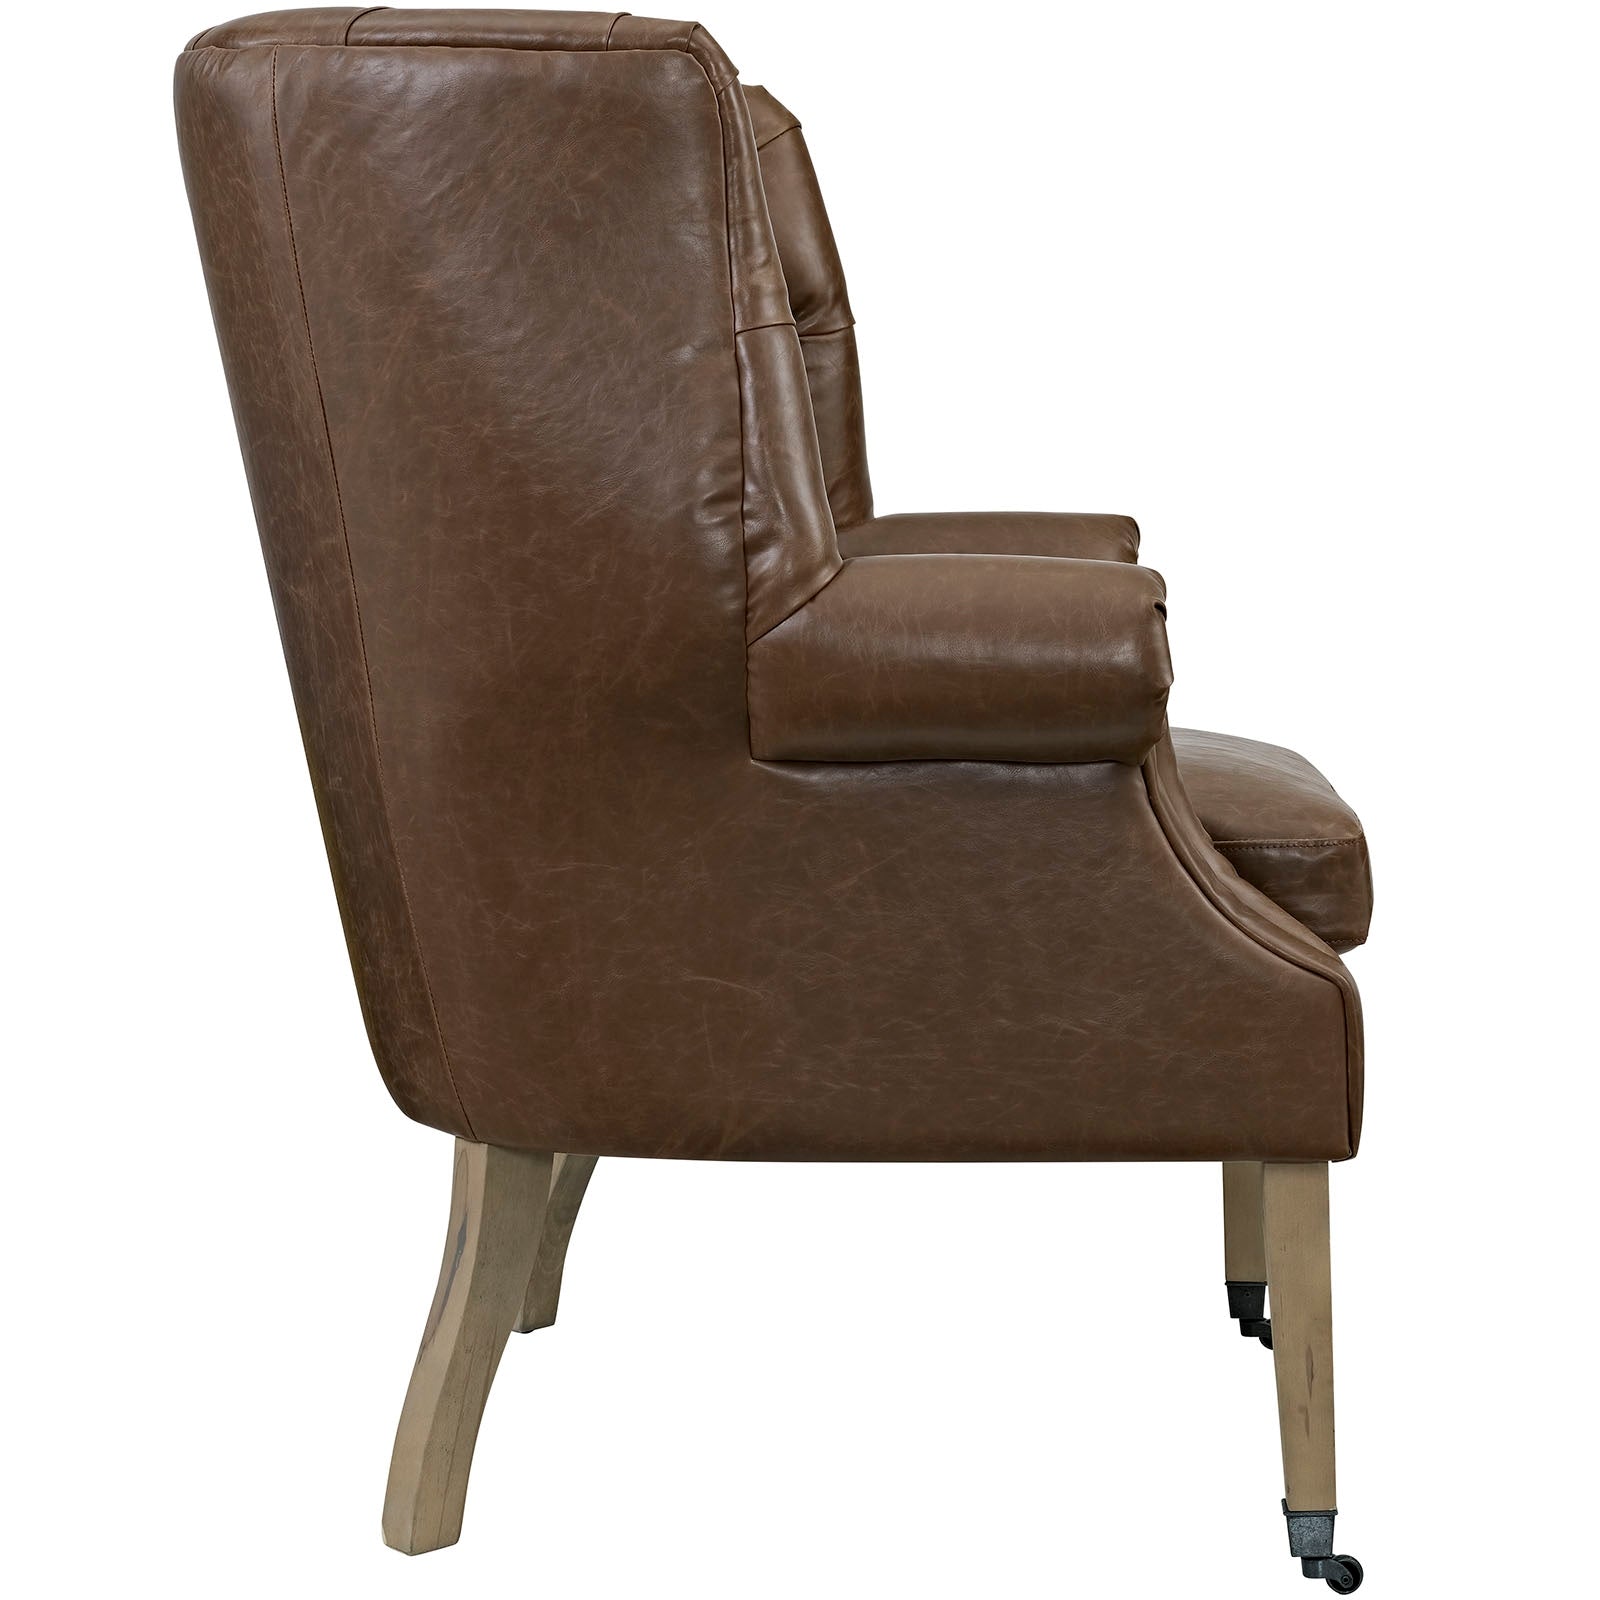 Chart Upholstered Vinyl Lounge Chair in Brown